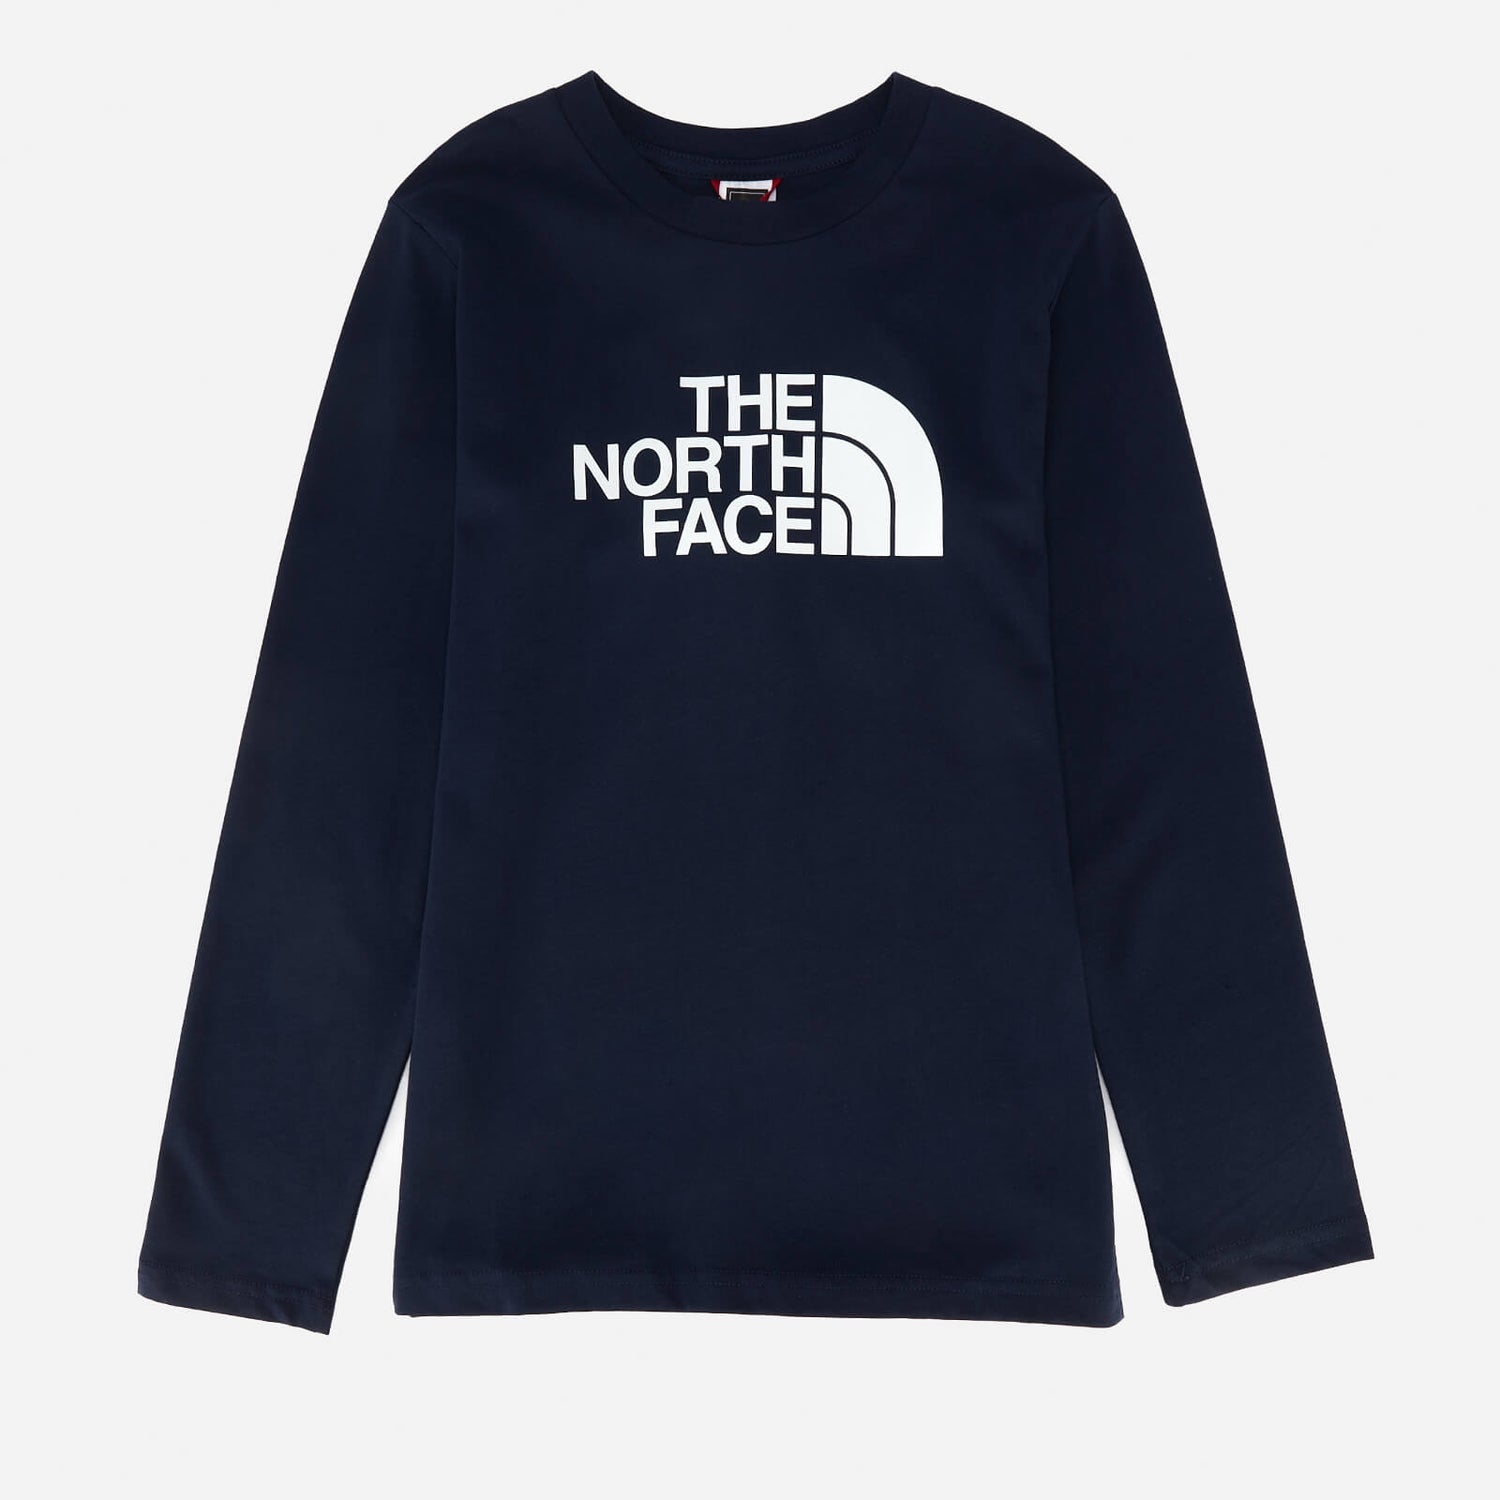 The North Face Boys' Youth Long Sleeve Easy T-Shirt - Navy